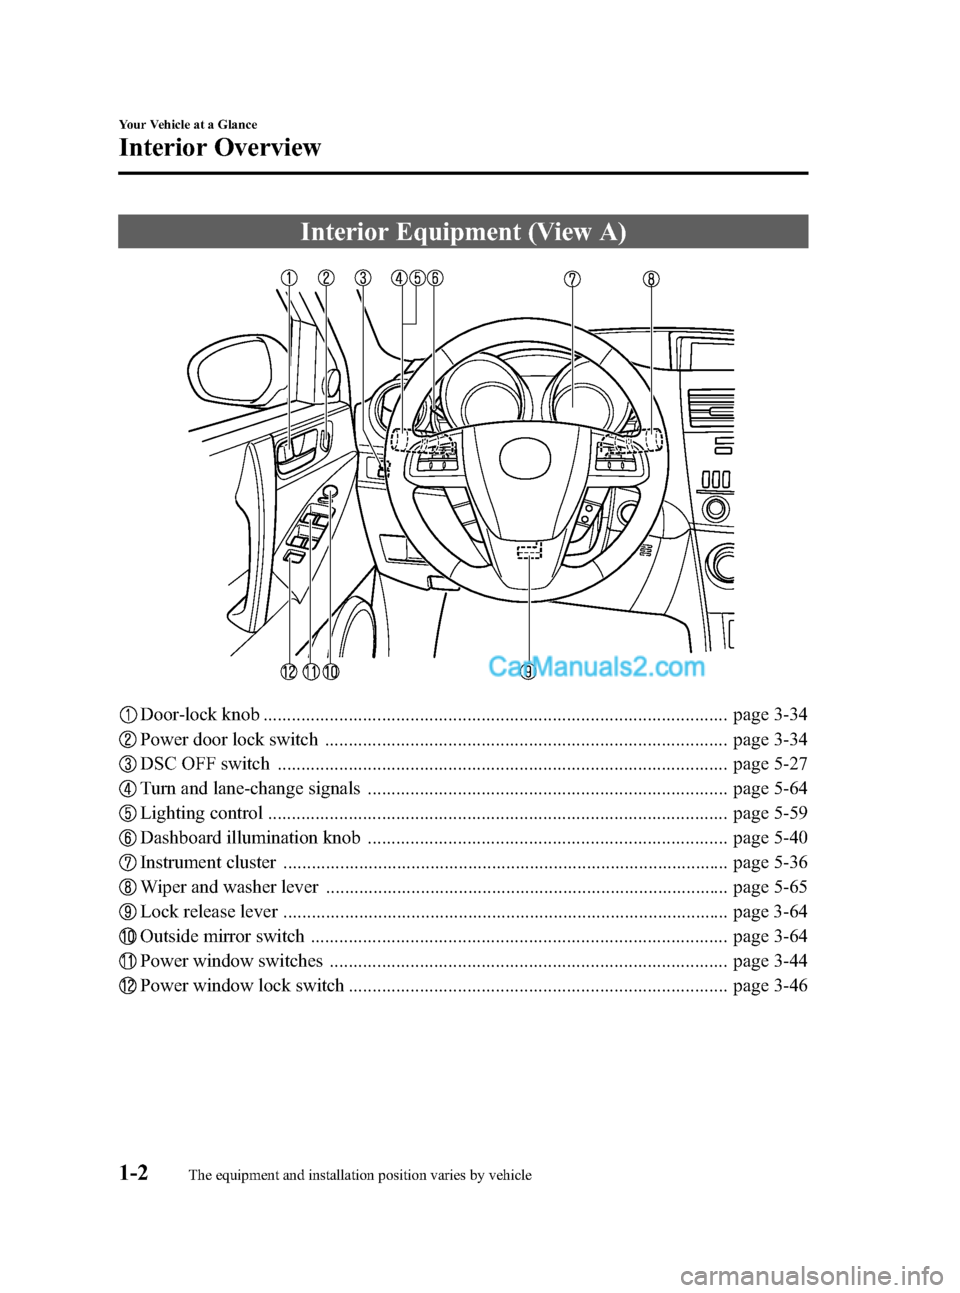 MAZDA MODEL MAZDASPEED 3 2012  Owners Manual (in English) Black plate (8,1)
Interior Equipment (View A)
Door-lock knob .................................................................................................. page 3-34
Power door lock switch .......